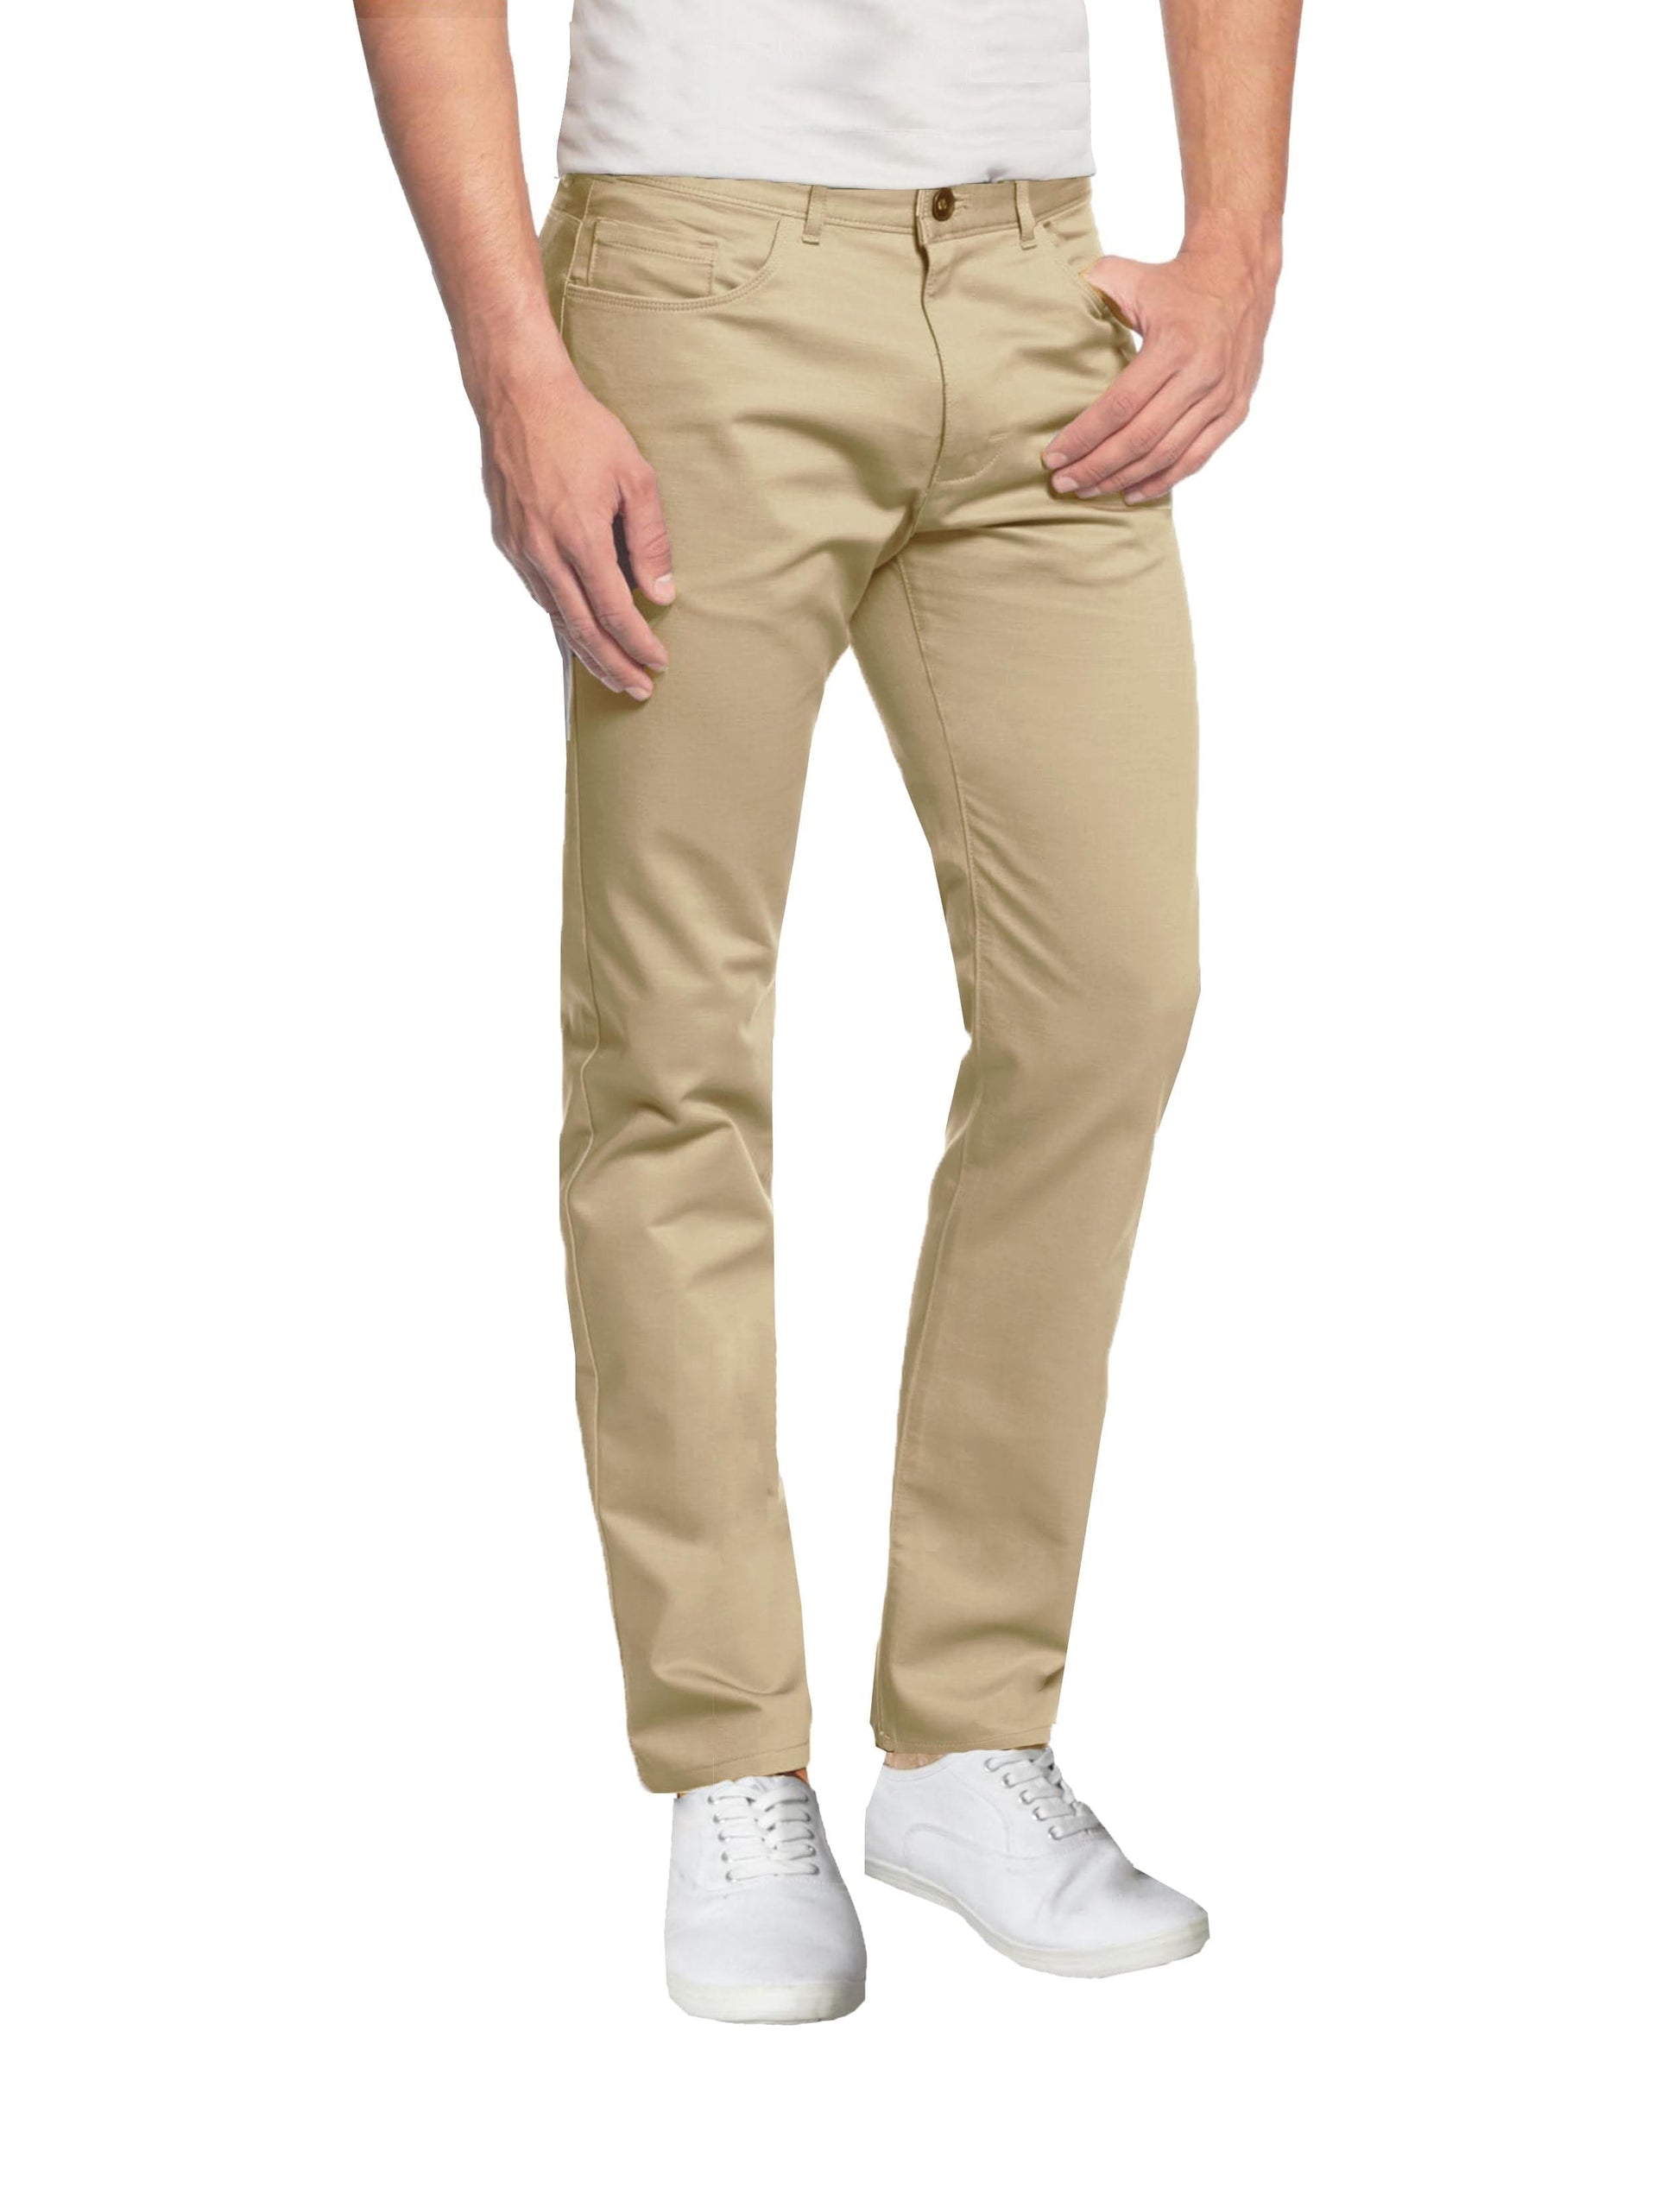 Men's Slim Fitting Cotton Stretch 5-Pocket Chino Pants (Sizes, 30-42) - GalaxybyHarvic